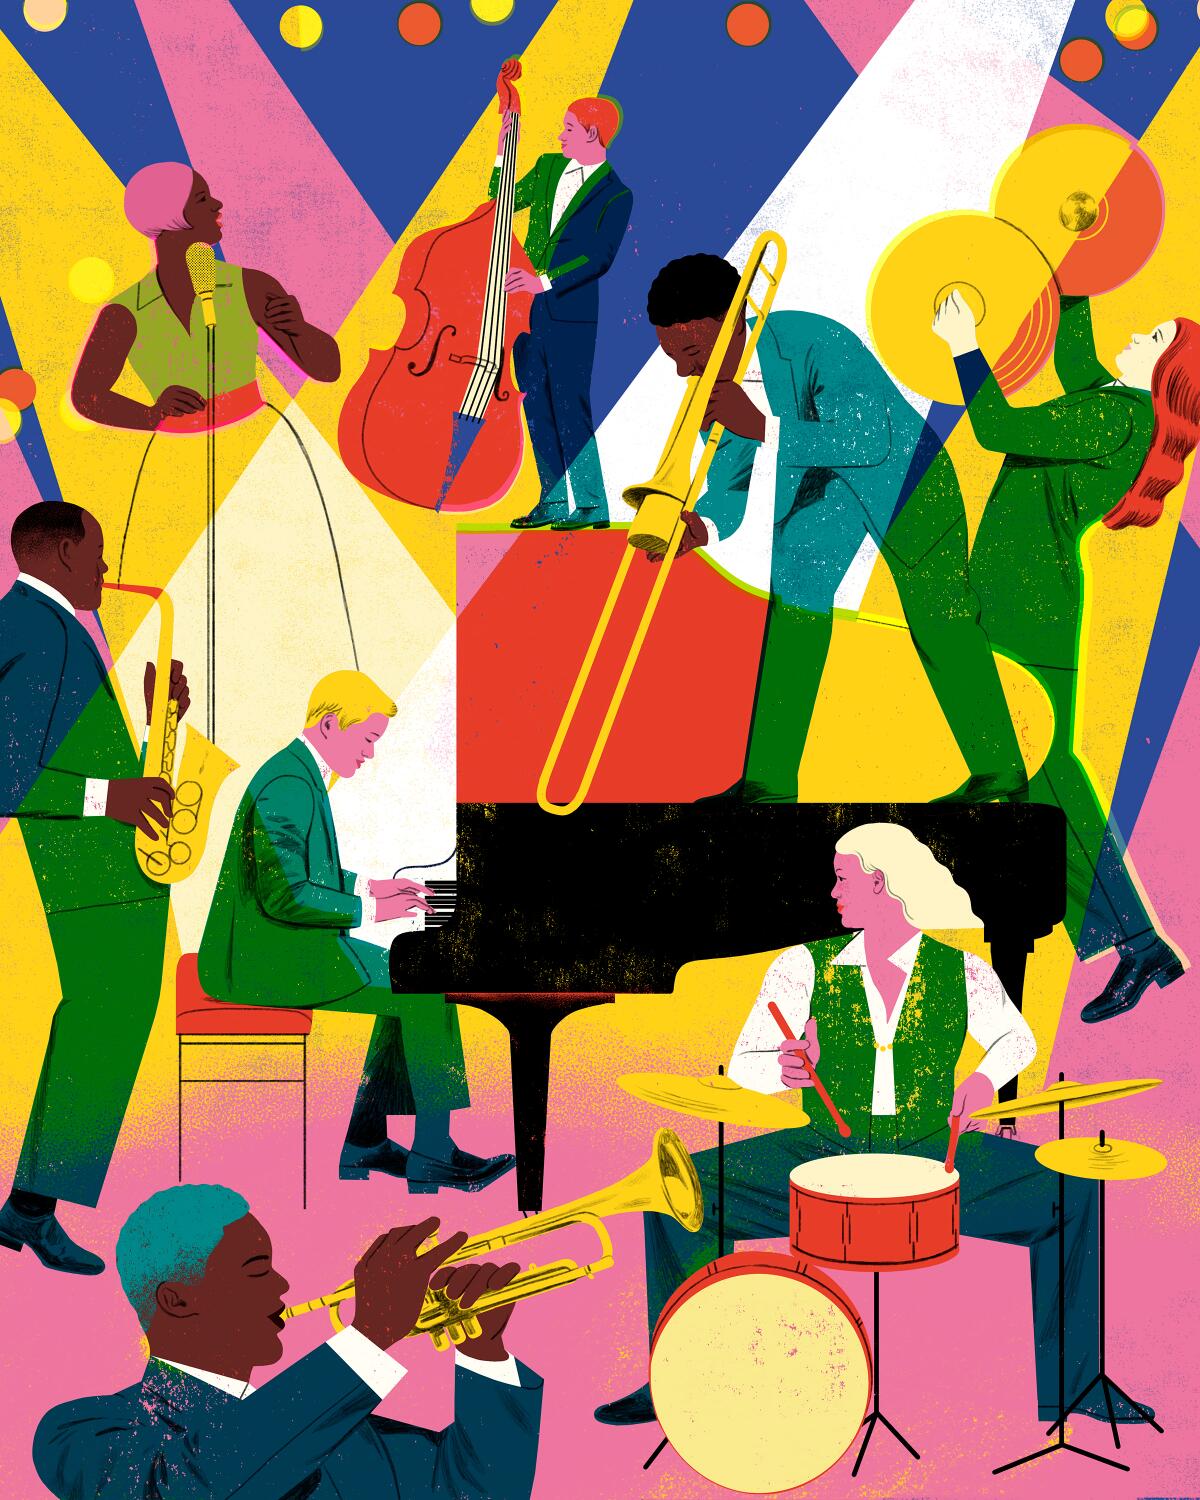 Illustration of a jazz band playing under colorful spotlights